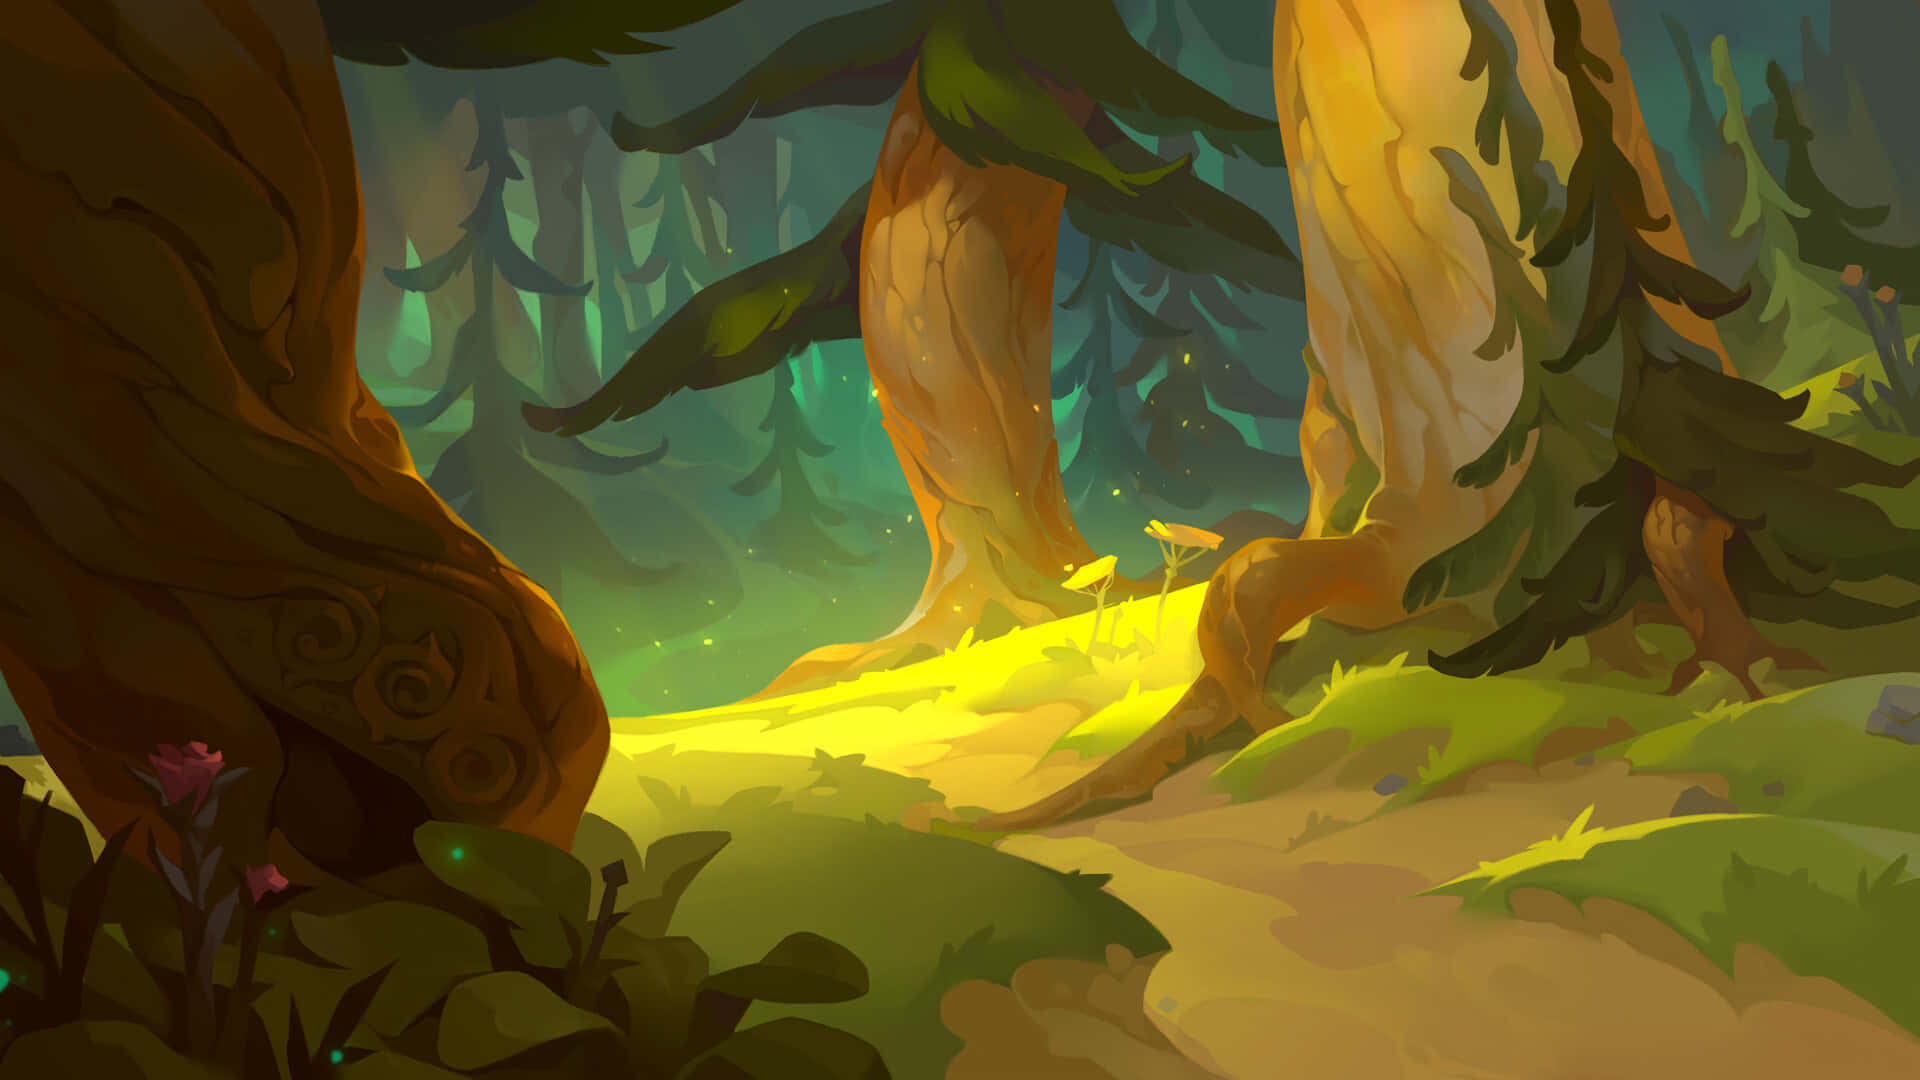 A sunset view of a mysterious animated forest